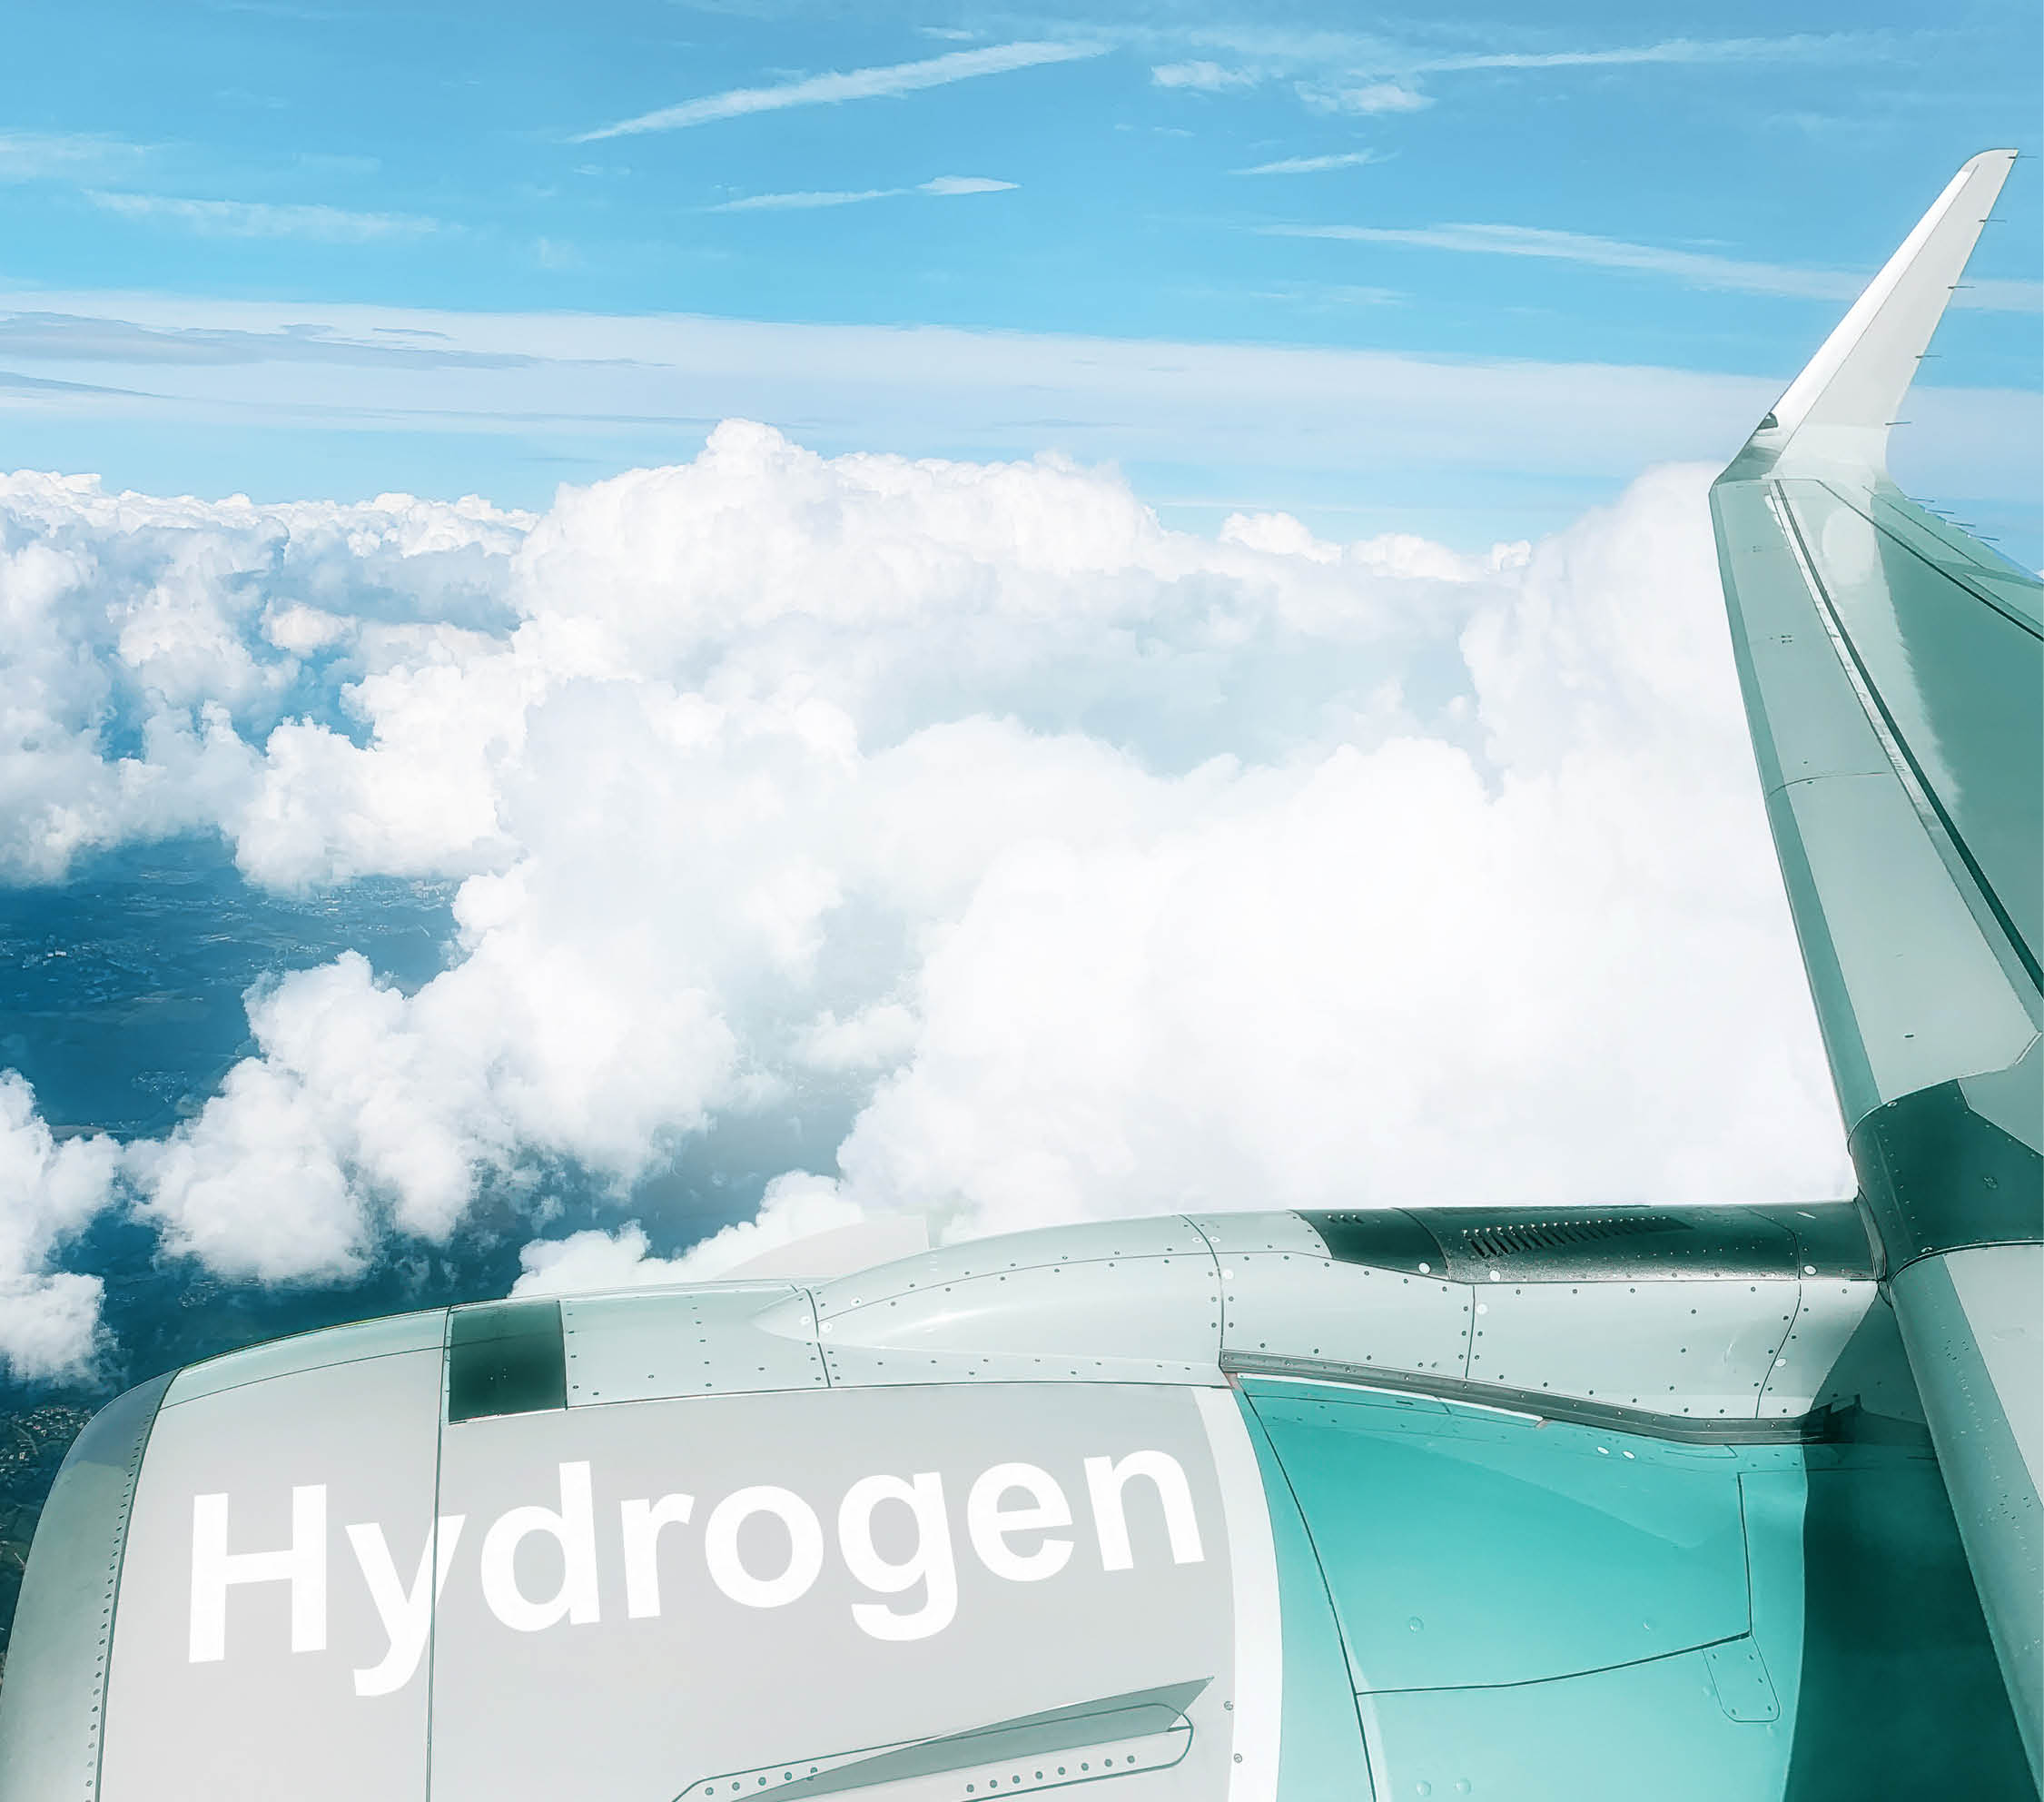 Experimental Airplane with Hydrogen H2 fuel flying high up in the clouds. Ecological and renewable fuel and power